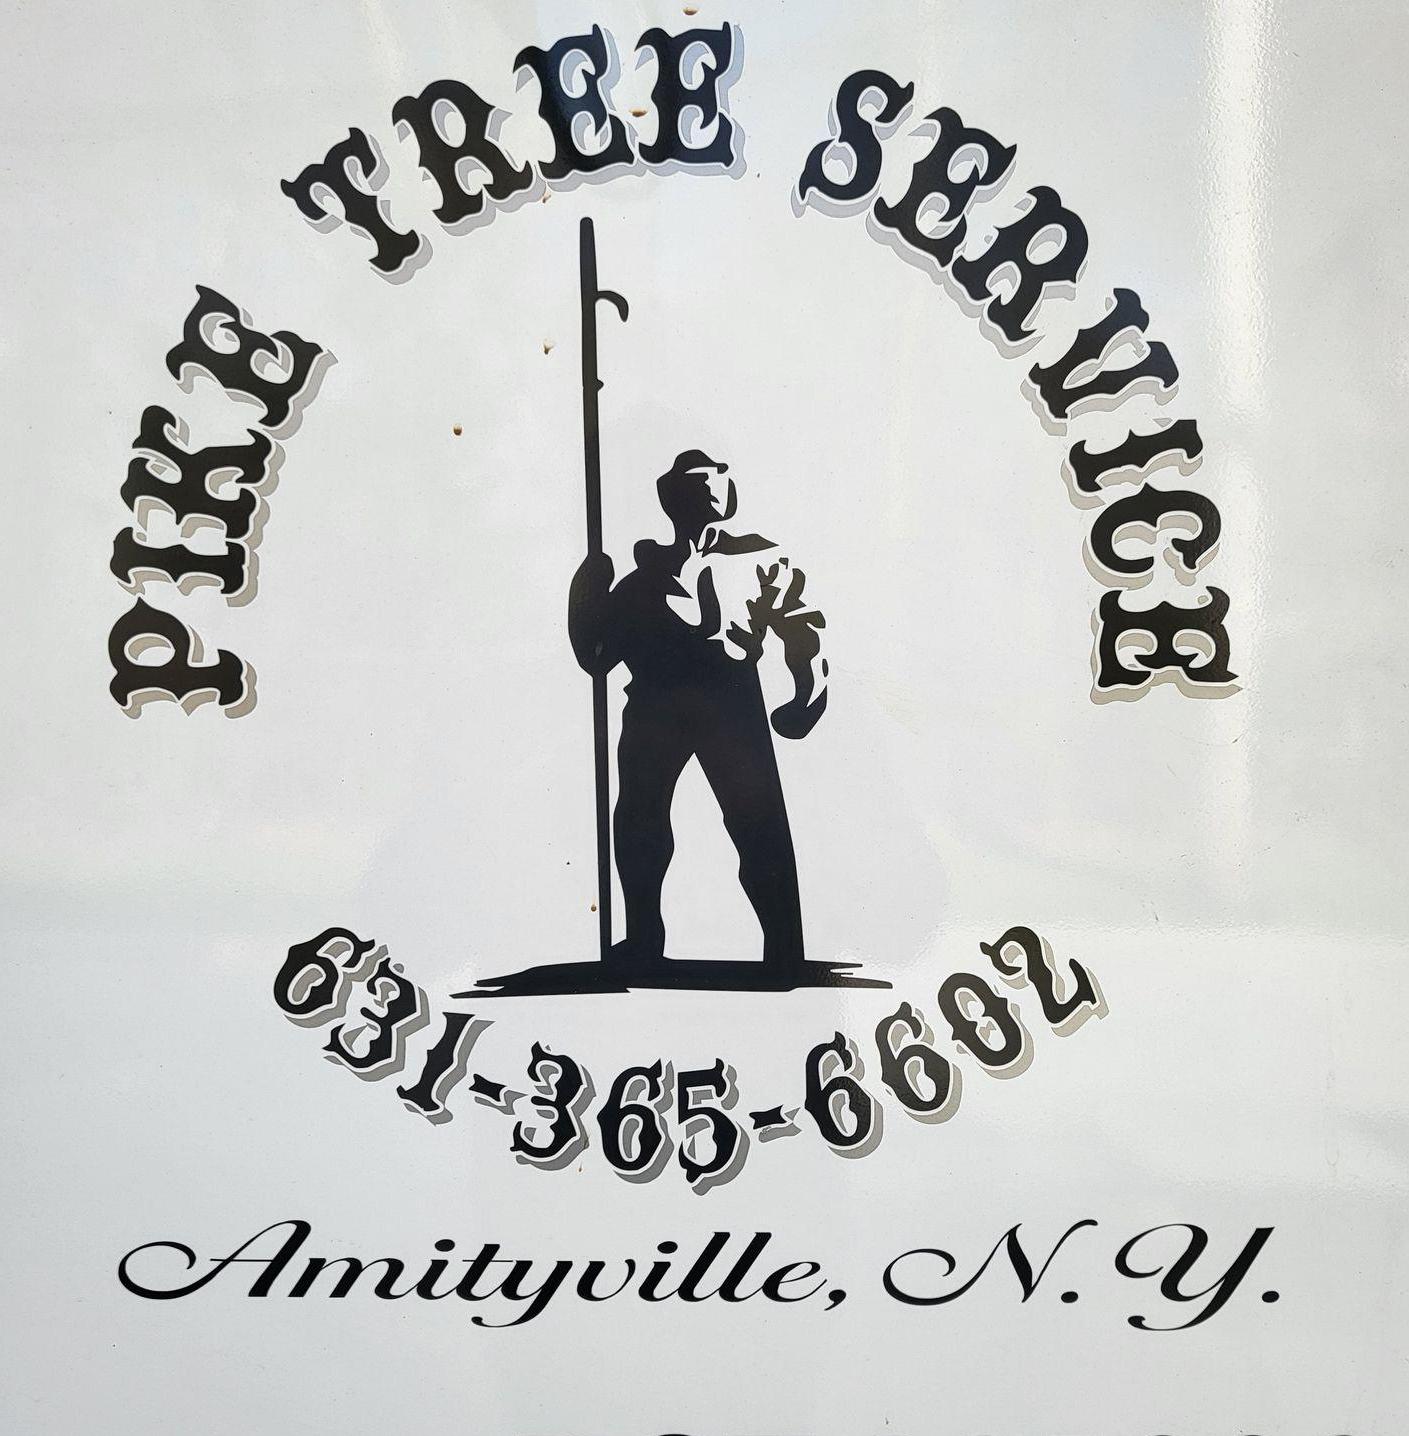 Pike Tree & Landscape Service Specialize In Tree Trimming And Stump Grinding